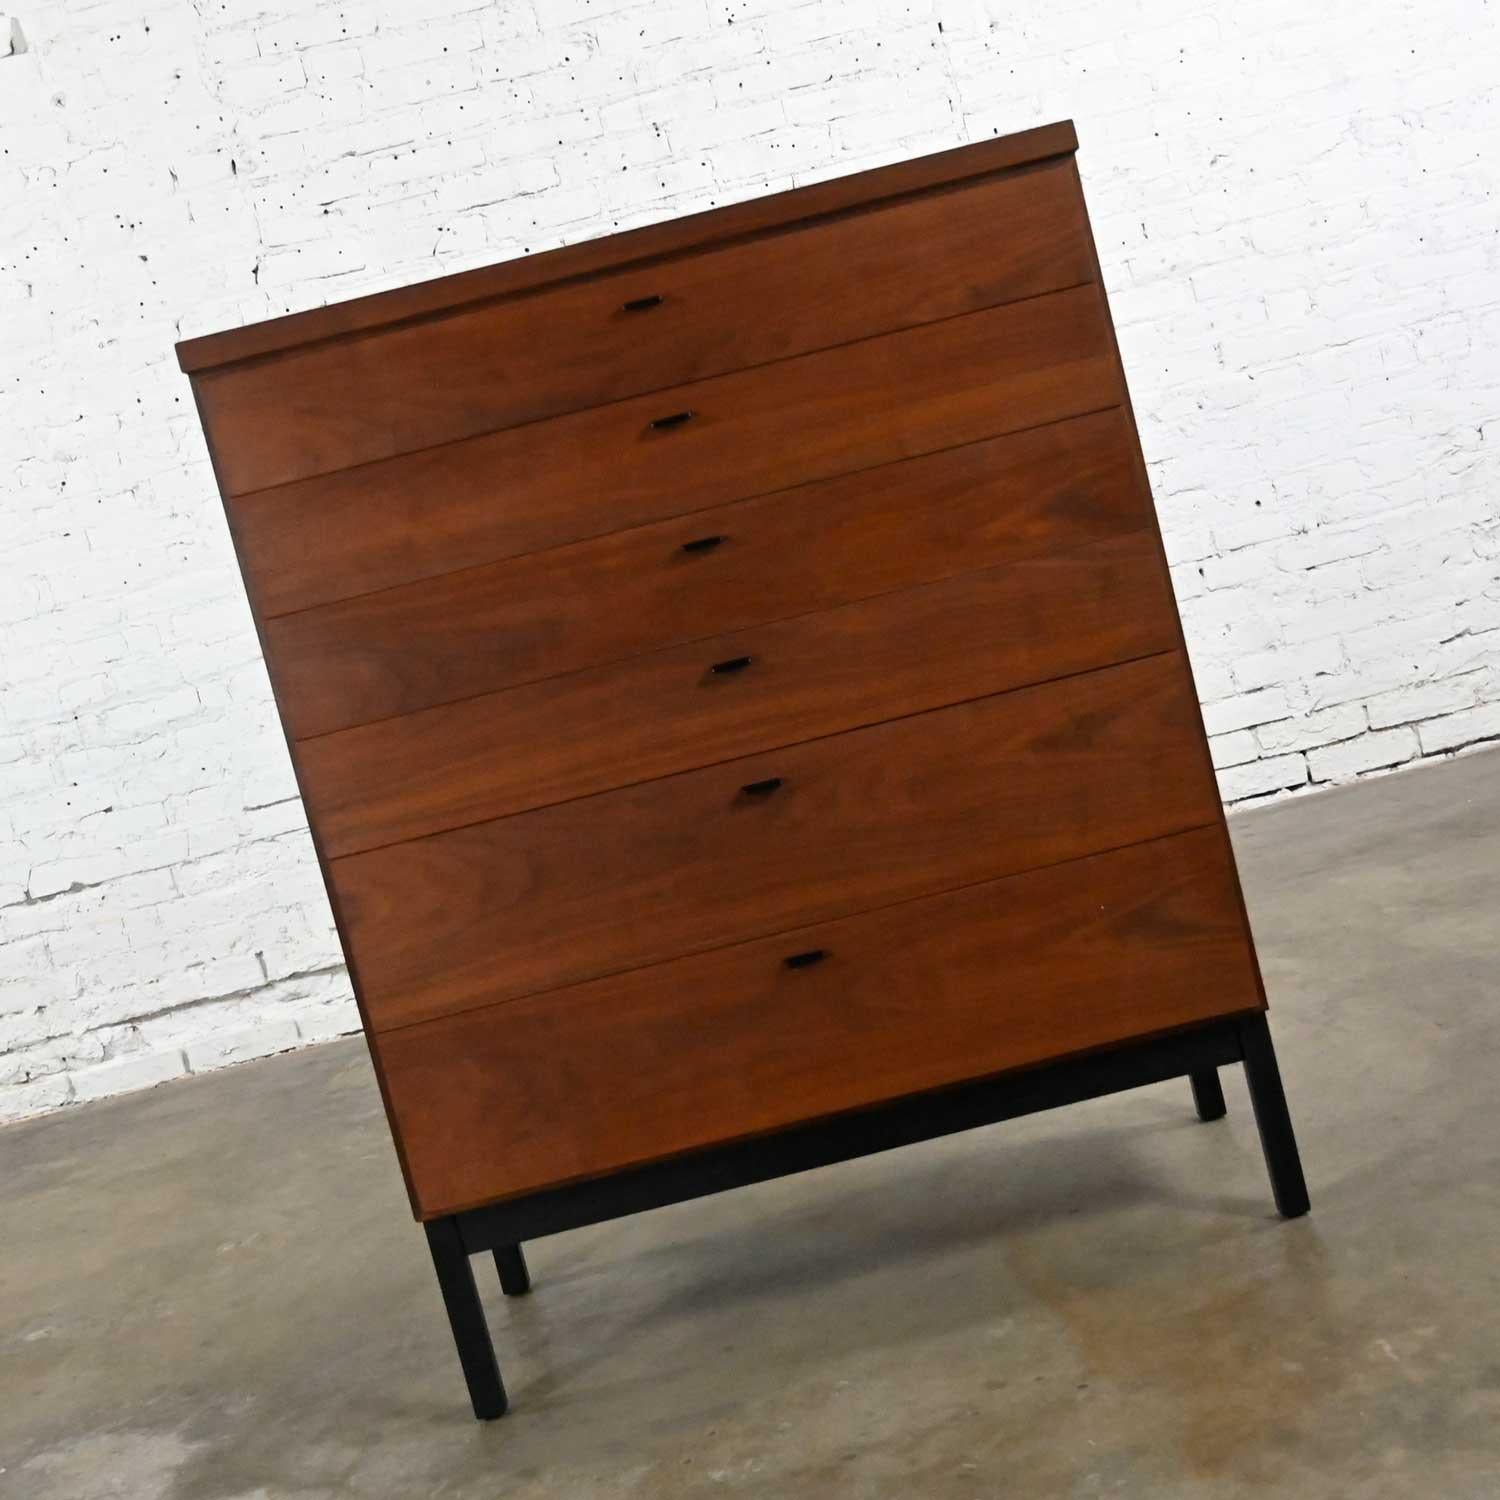 Vintage MCM or Mid-Century Modern Jack Cartwright for Founders Furniture Patterns 10 walnut chest of drawers or high-boy dresser comprised of 6 drawers with black pulls and a burnt umber base and legs. Beautiful condition, keeping in mind that this